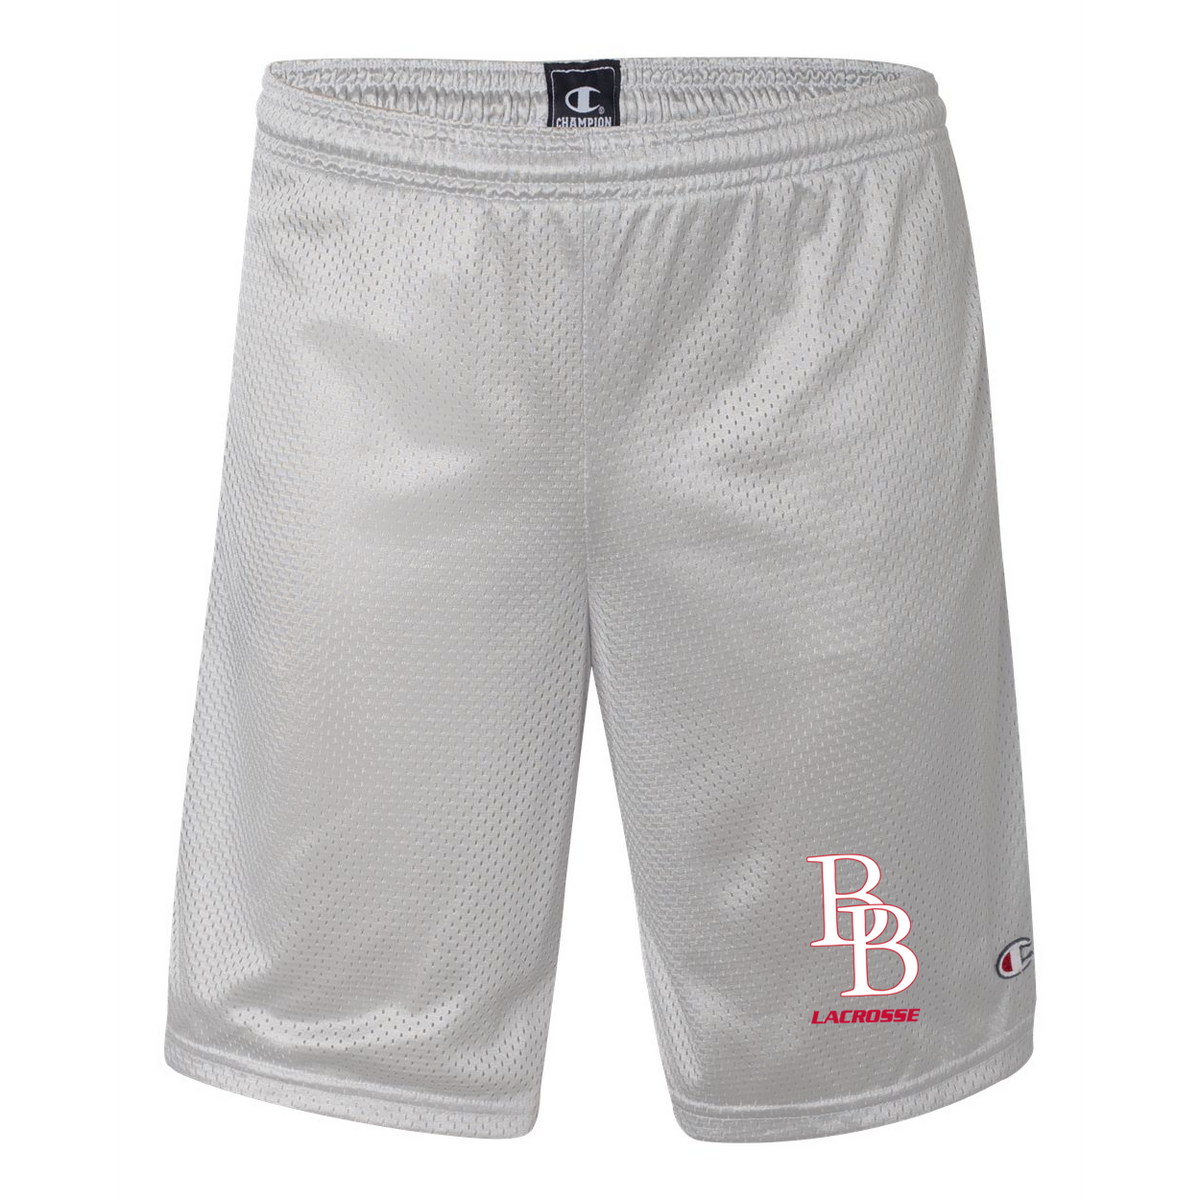 Blind Brook Lacrosse Champion Mesh Shorts with Pockets